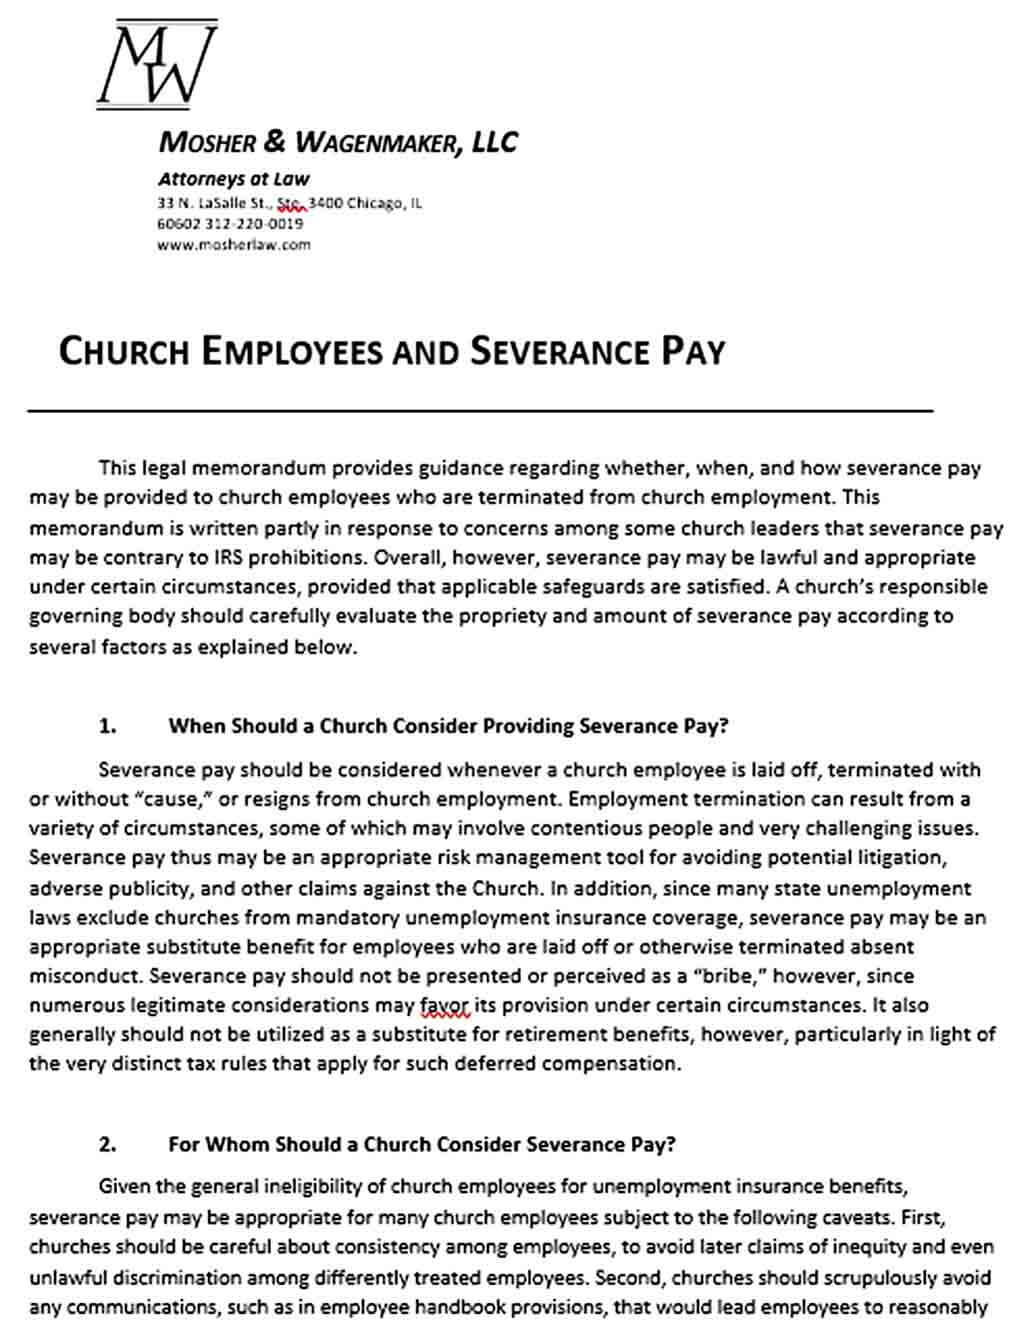 Sample Church Confidentiality Agreement Employees and Severance Pay